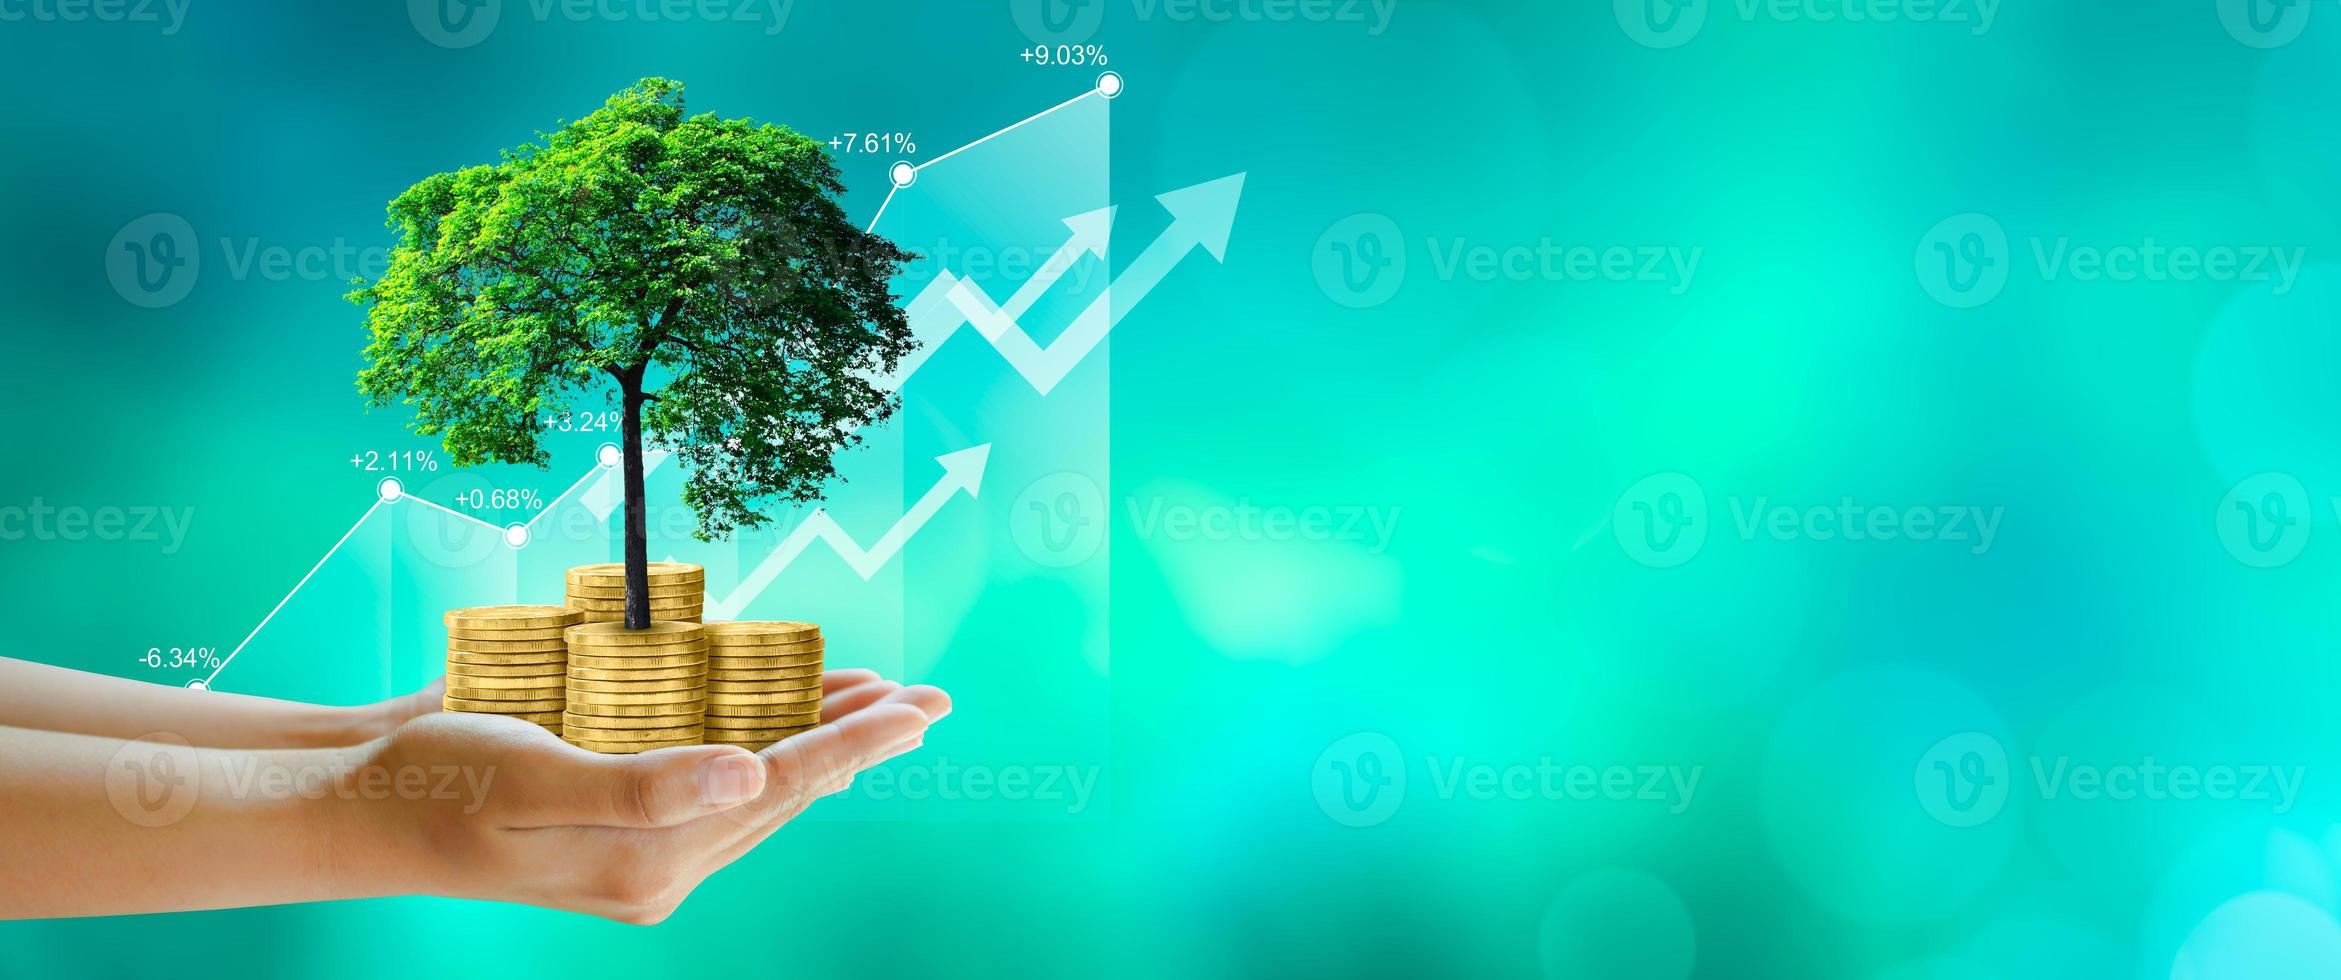 Hand holding growing tree on coins with stock graph over green background photo